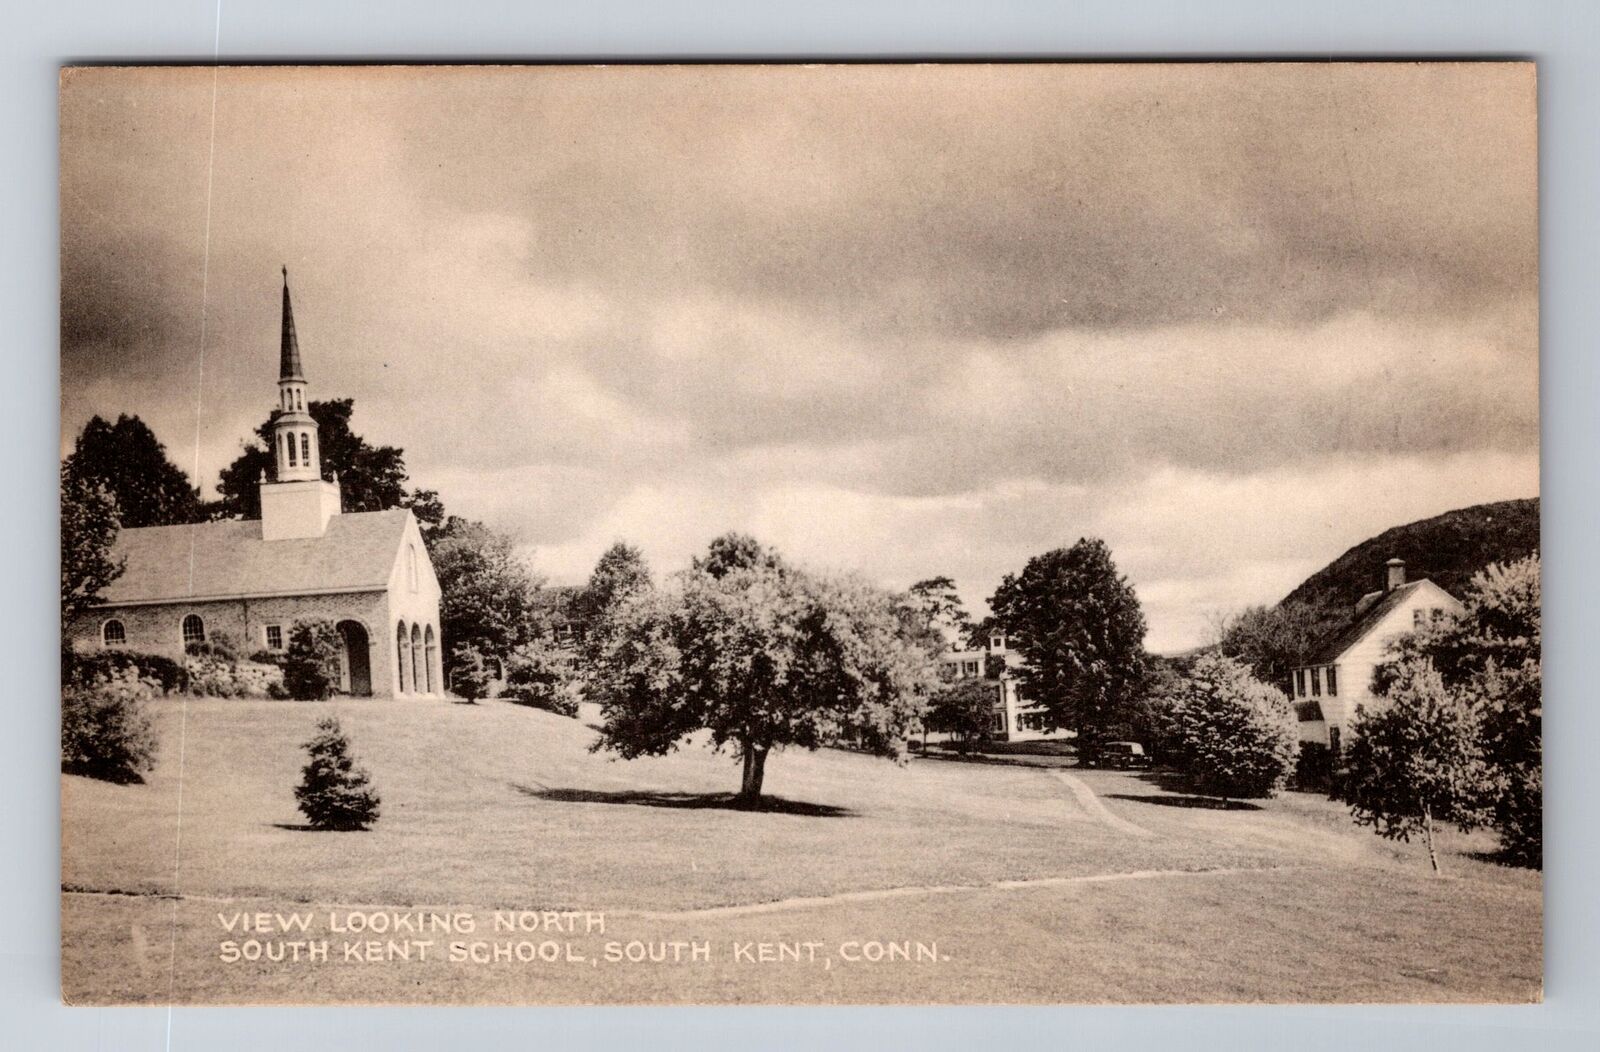 South Kent CT-Connecticut View Looking North South Kent School Vintage Postcard